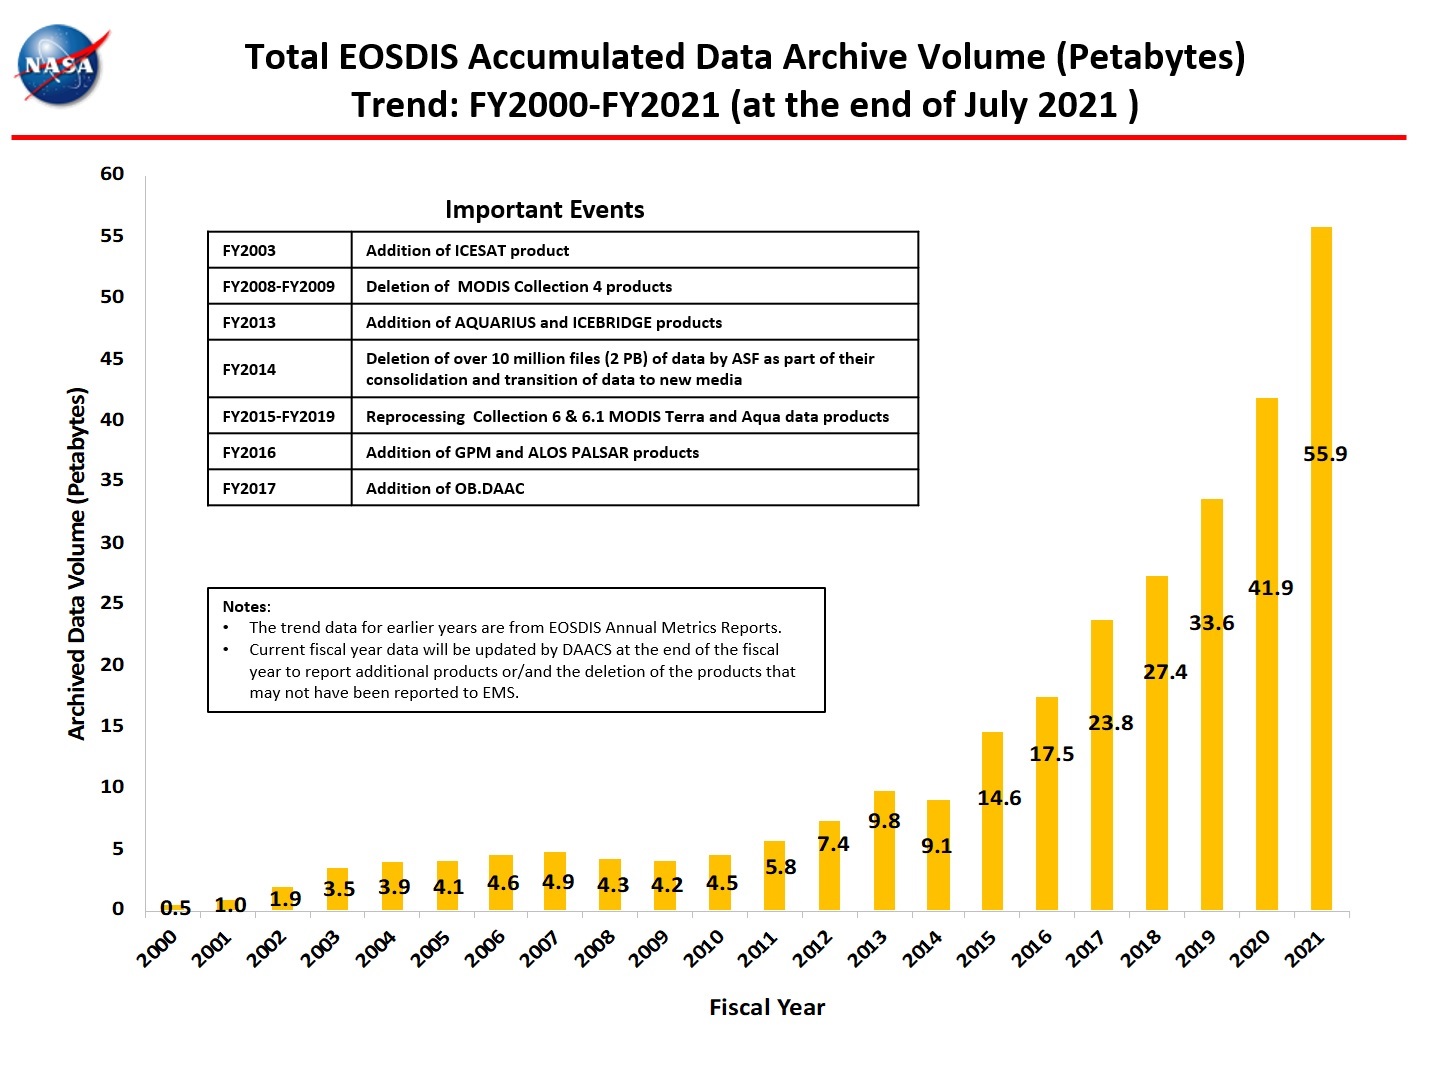 Total Accumulated Data Archive Volume FY2000 through 7-2021